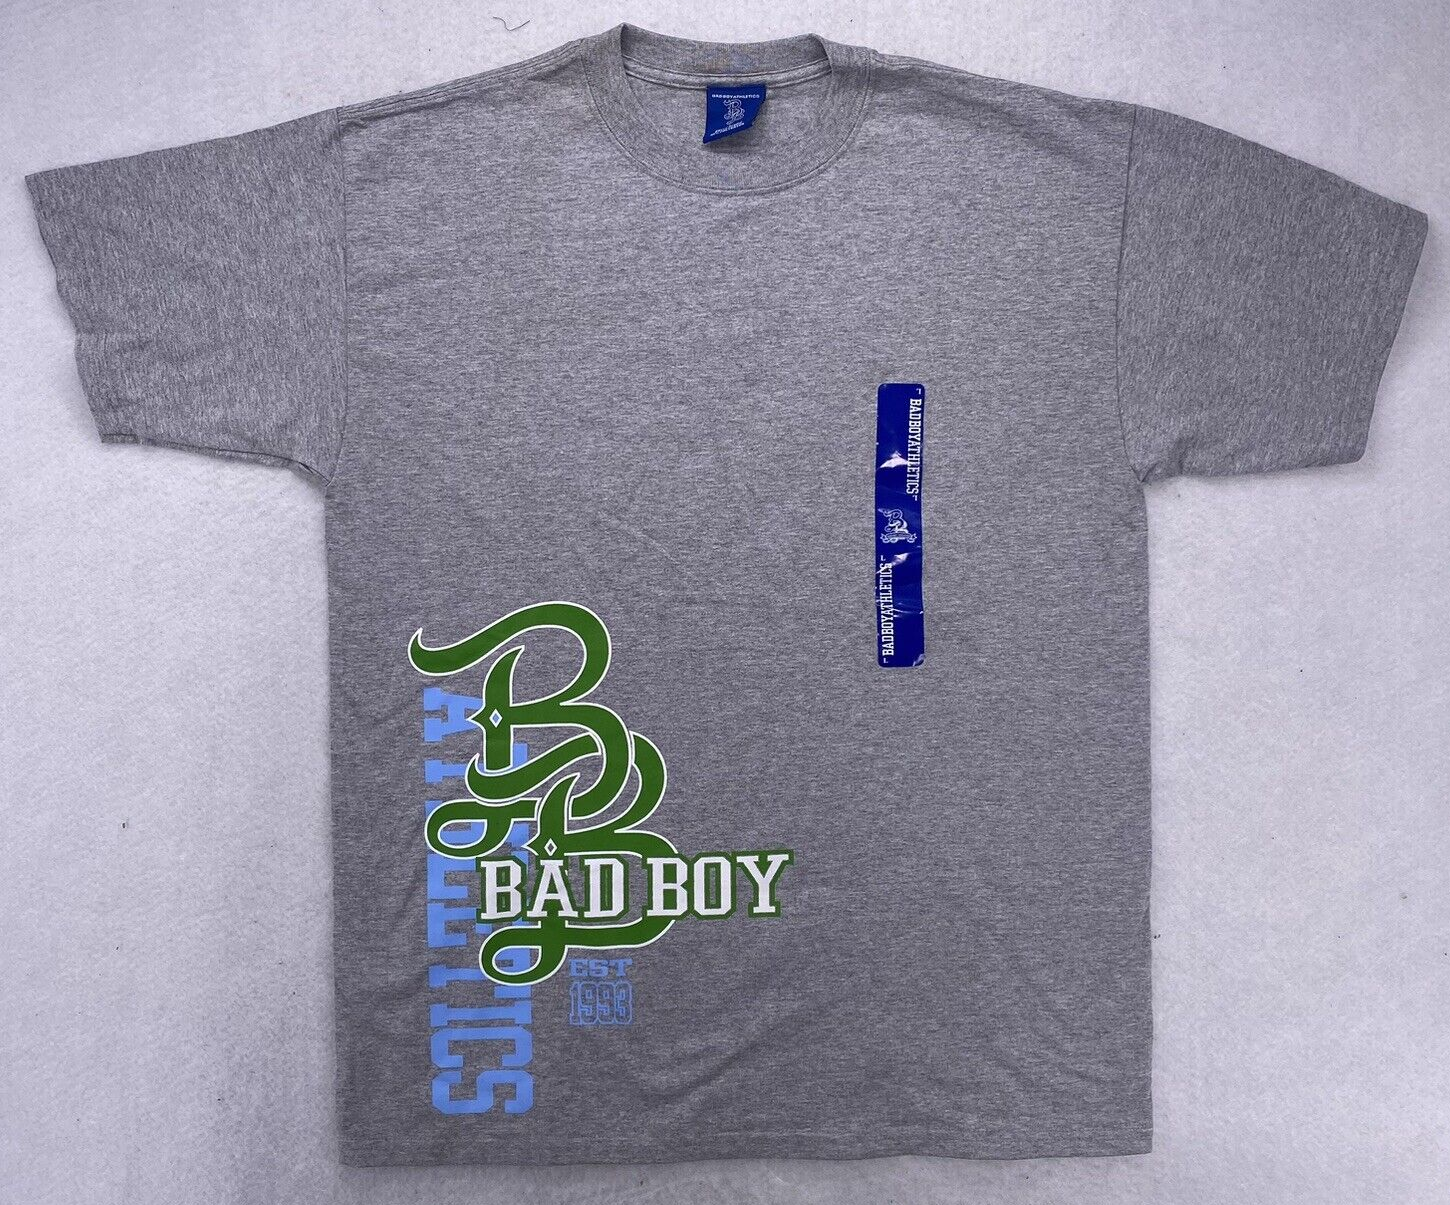 Primary image for Bad Boy Tee Shirt Men's Size Large 1990's Athletics Gray Graphic USA Made T